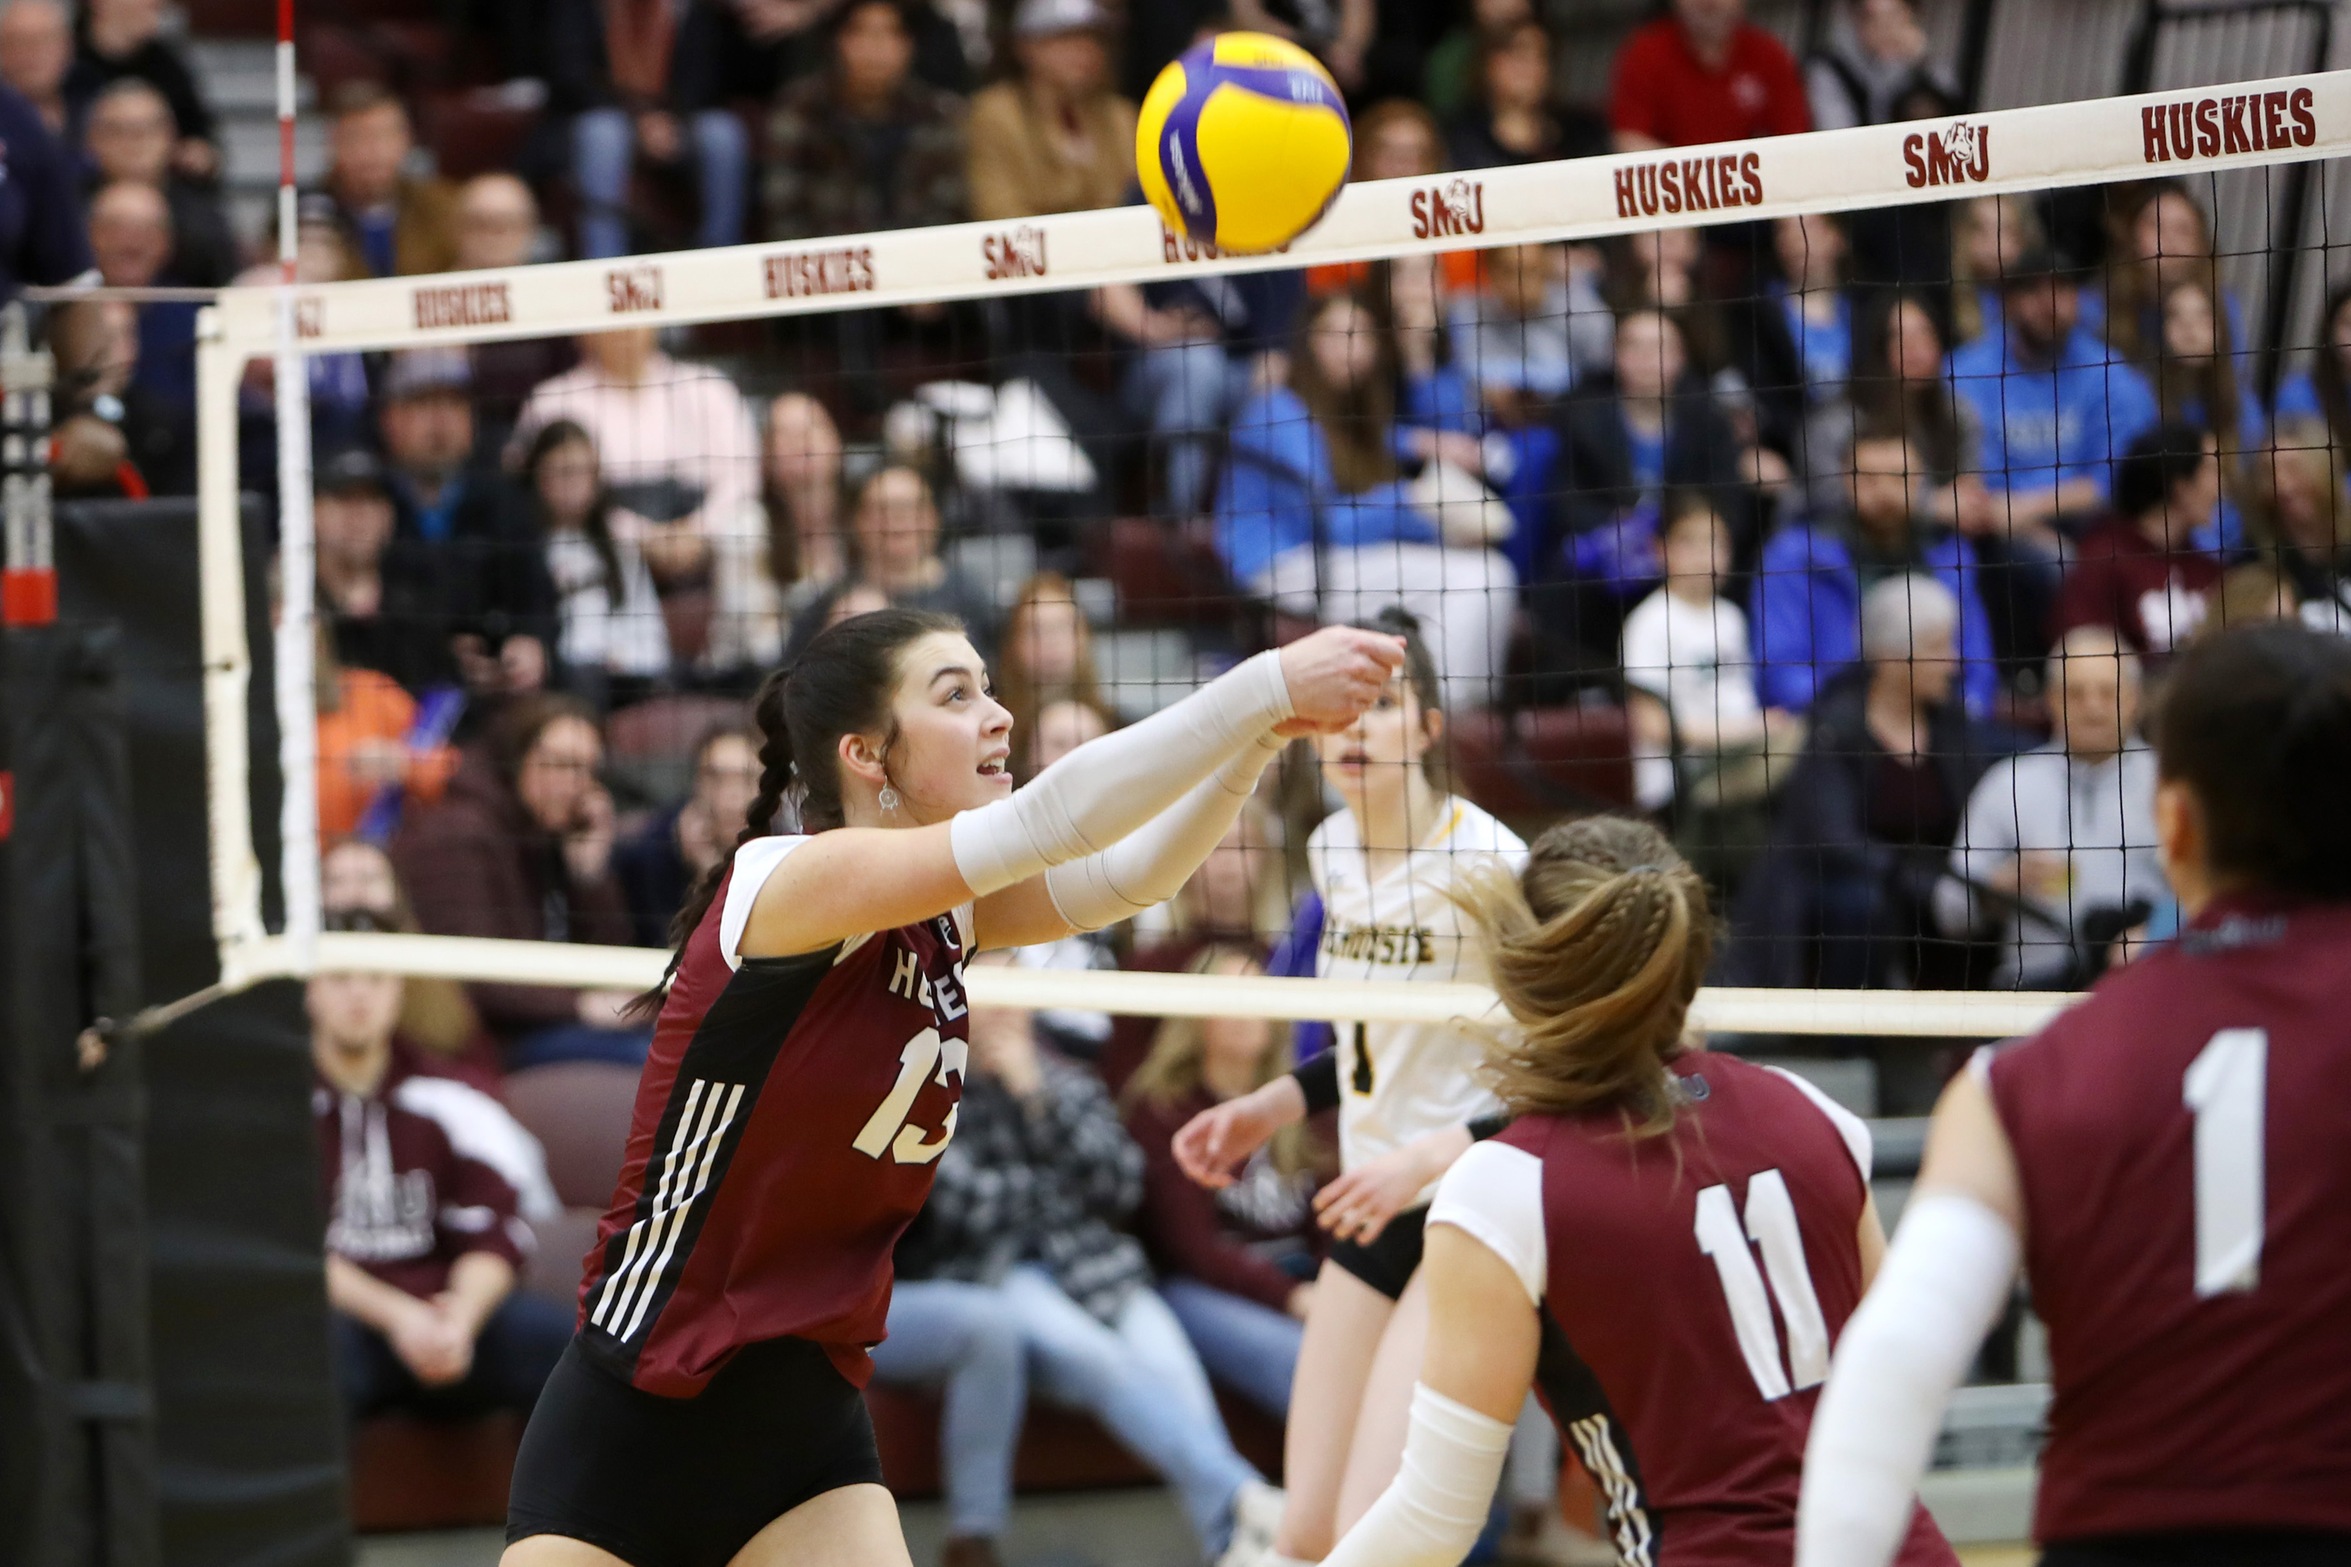 Tigers defeat Huskies in four sets to clinch top seed in AUS playoffs